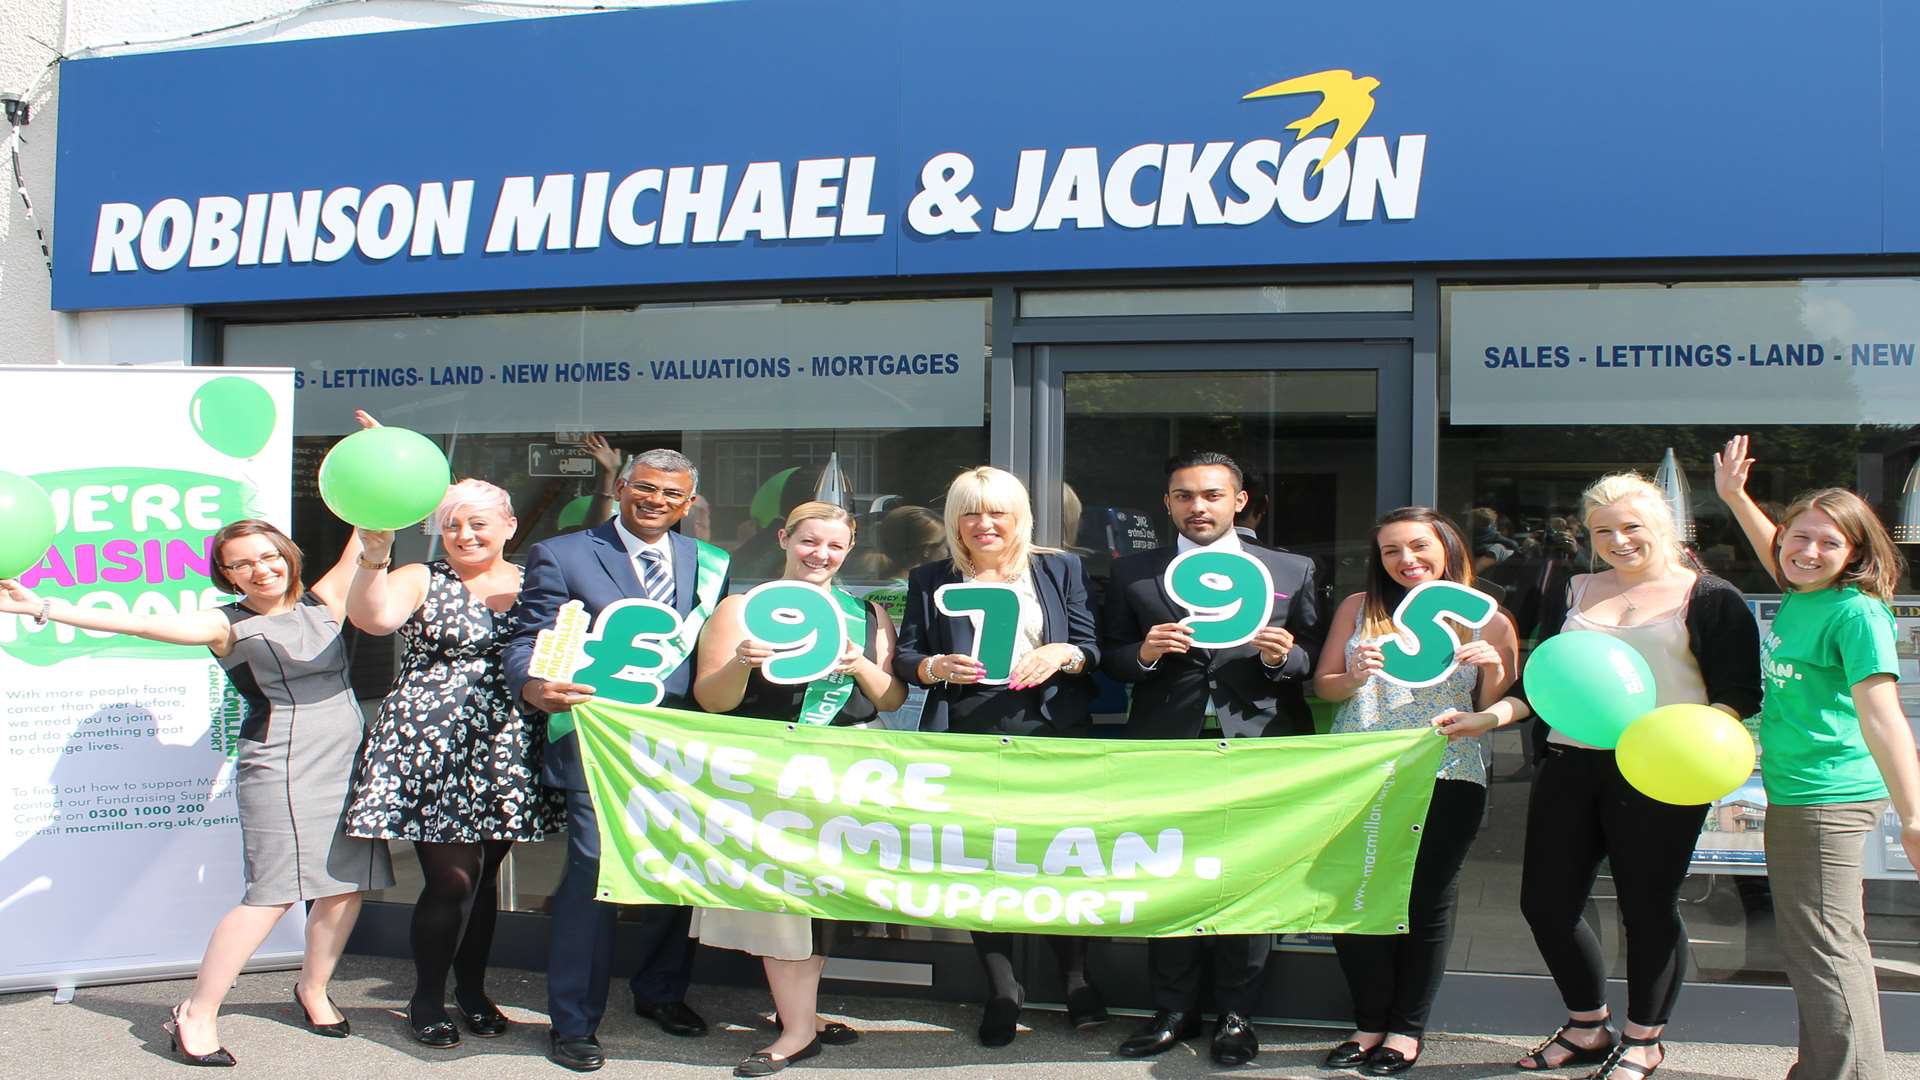 Estate agents Robinson Michael and Jackson are urging people to enter the draw in aid of Macmillan Cancer Support